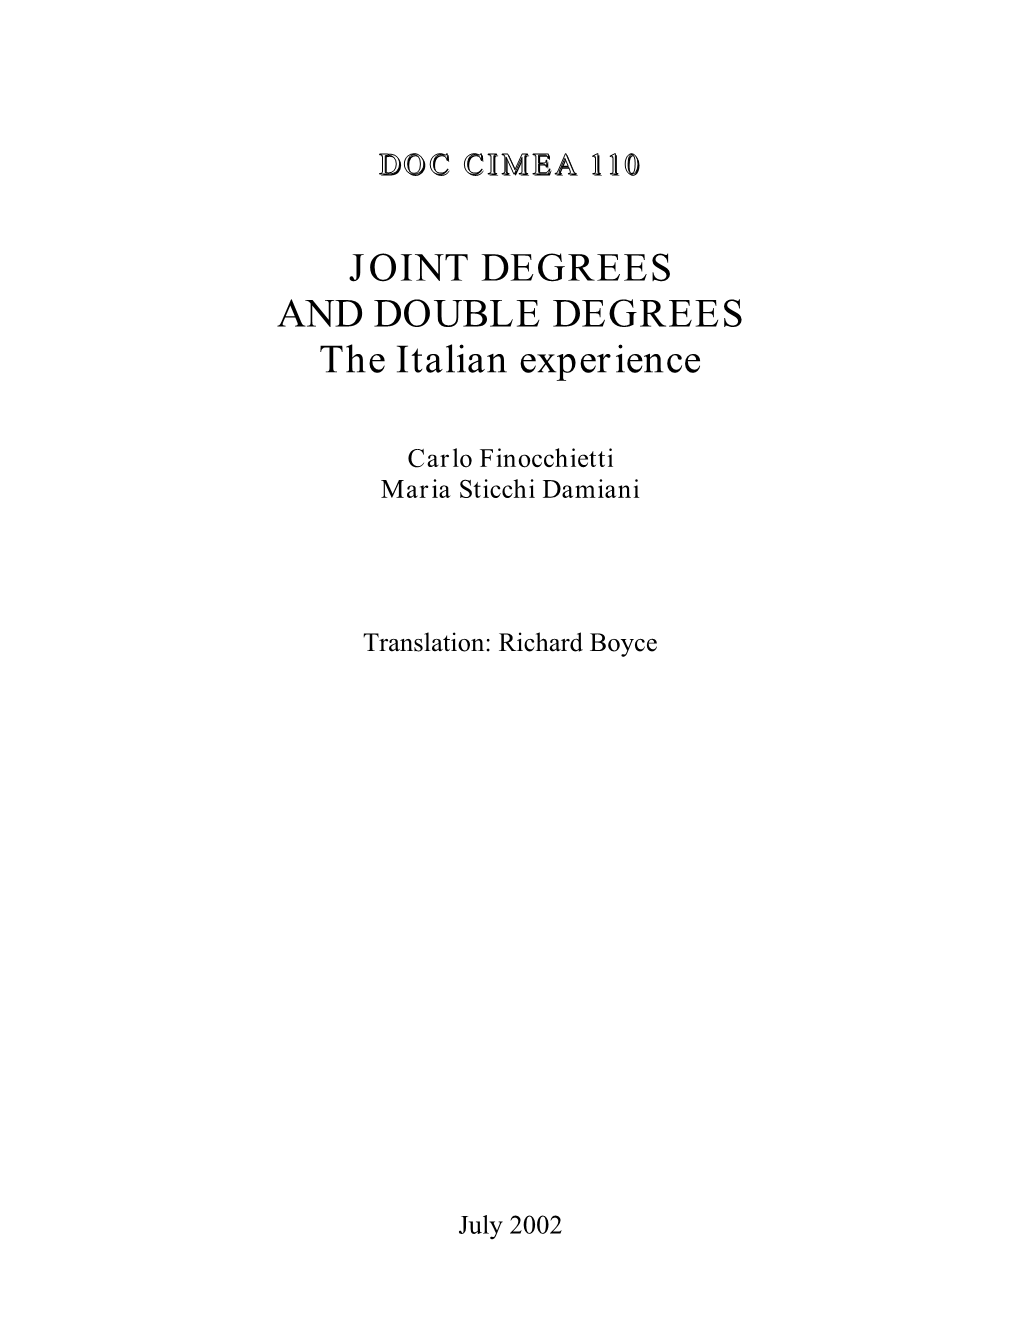 JOINT DEGREES and DOUBLE DEGREES the Italian Experience